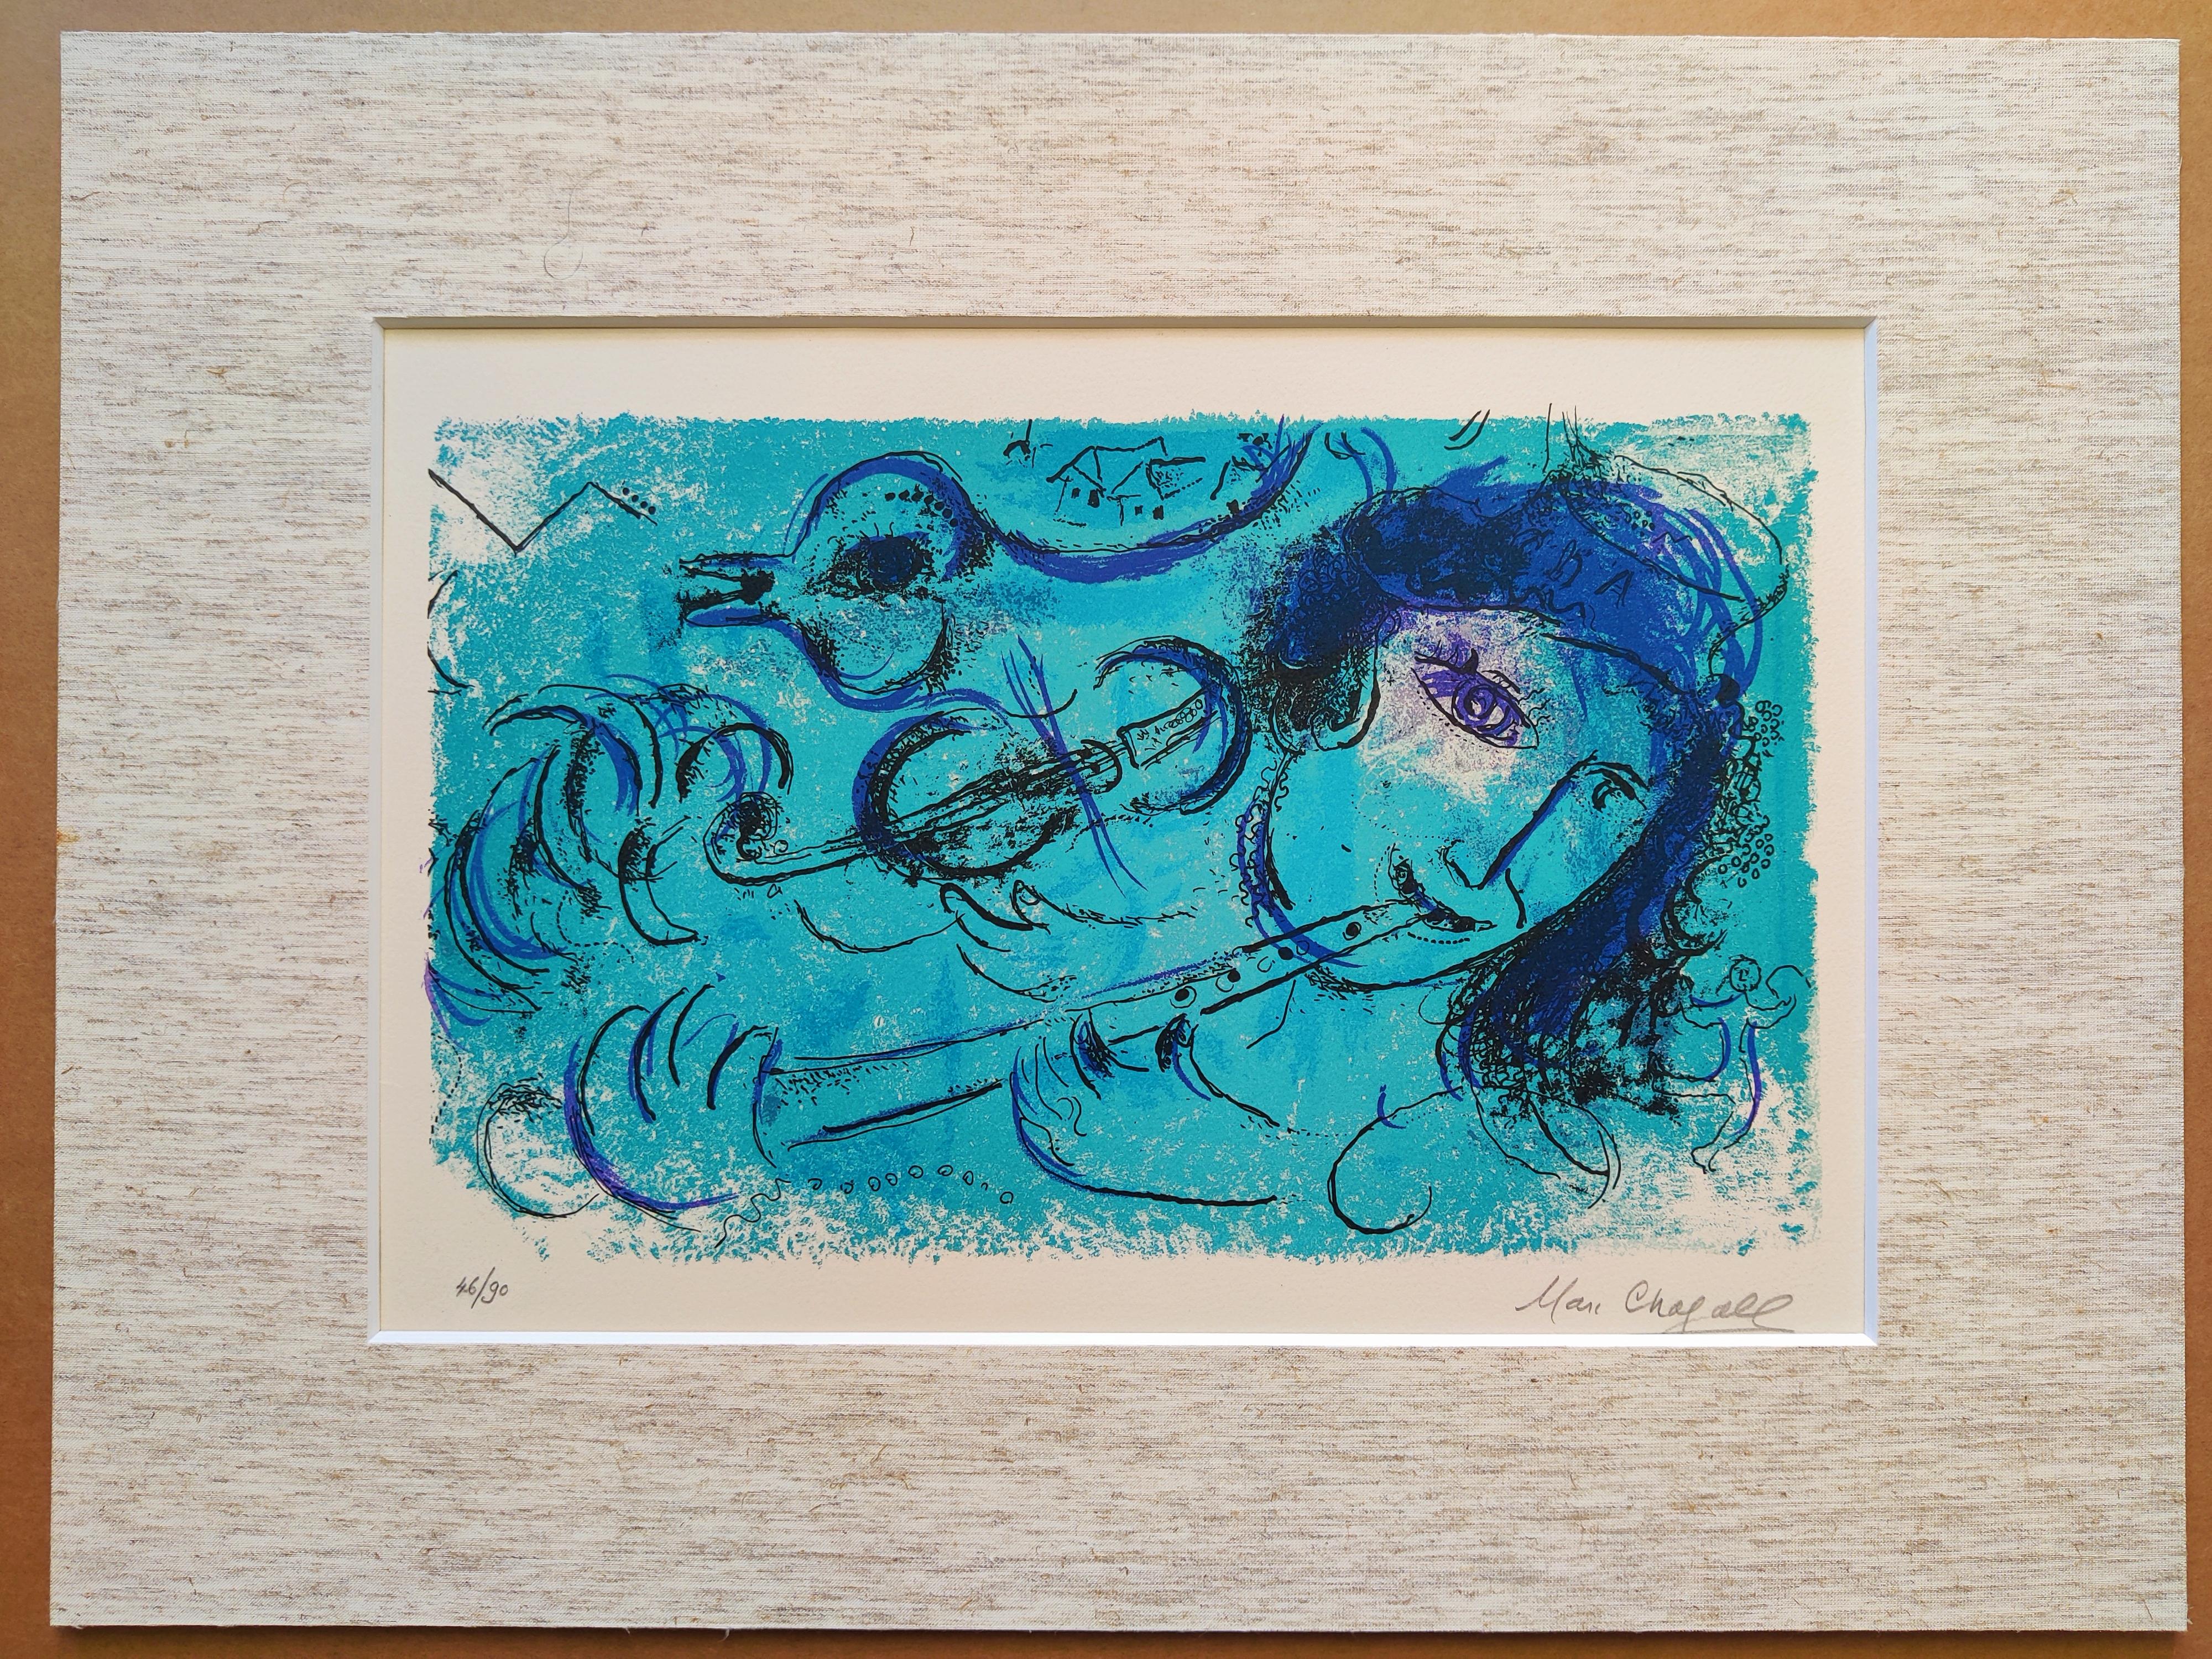 Marc Chagall
The Flute Player (M. 197)
Lithograph printed in colors, 1957
Signed low right in pencil 
Numbered 46/90
Published by Maeght, Paris
framed
image: 250 x 430 mm 
sheet: 380 x 560 mm 
excellent impression
